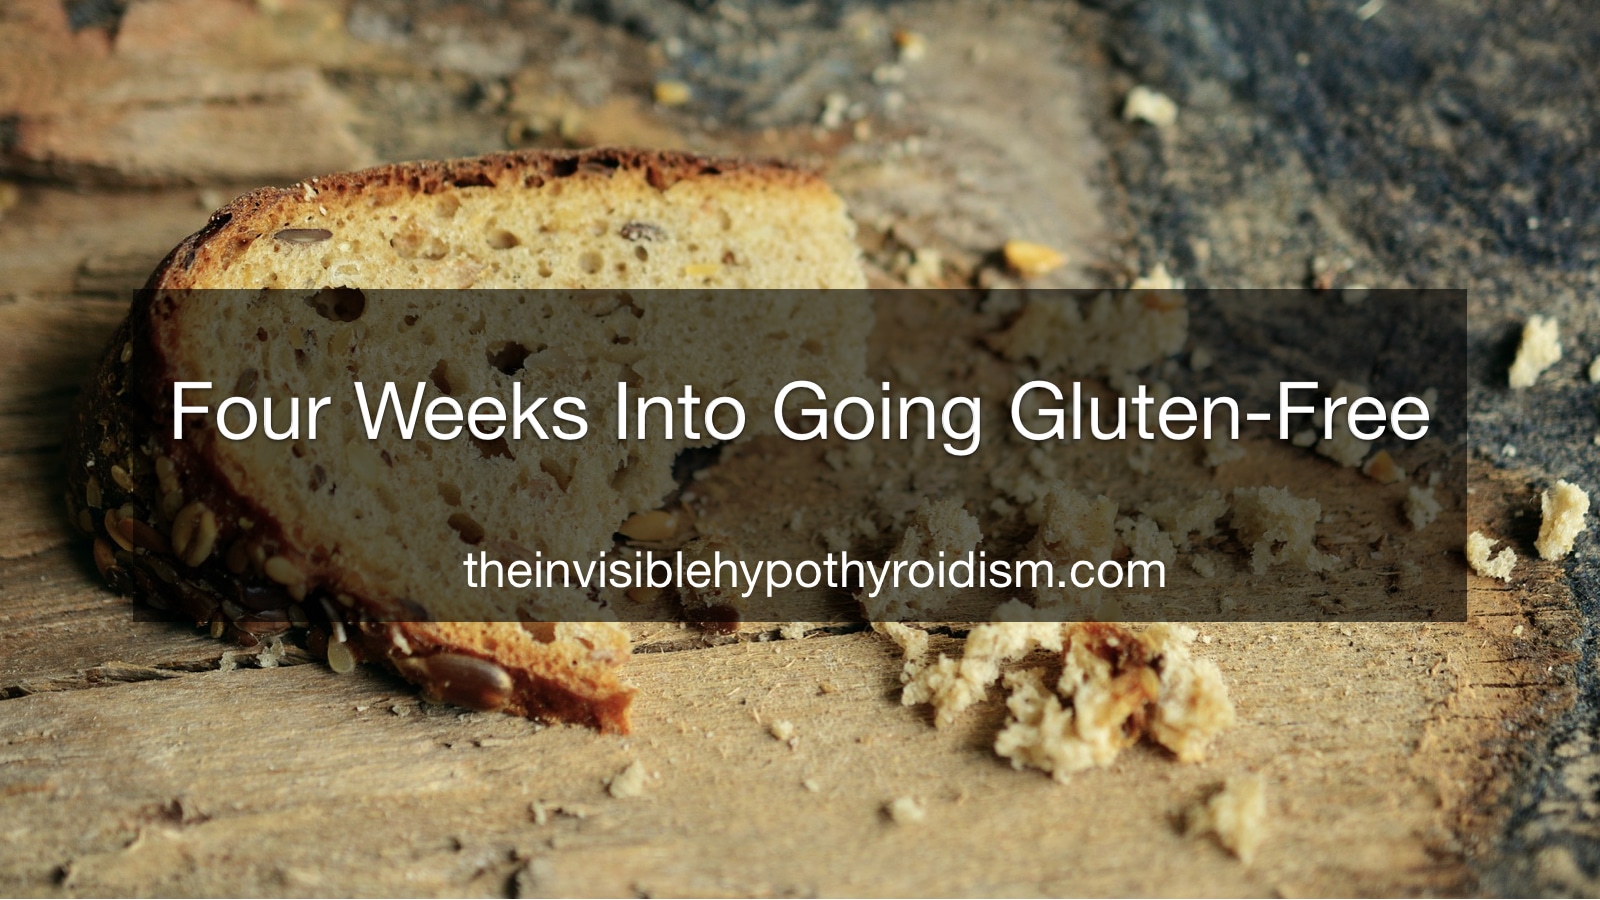 Four Weeks Into Going Gluten-Free